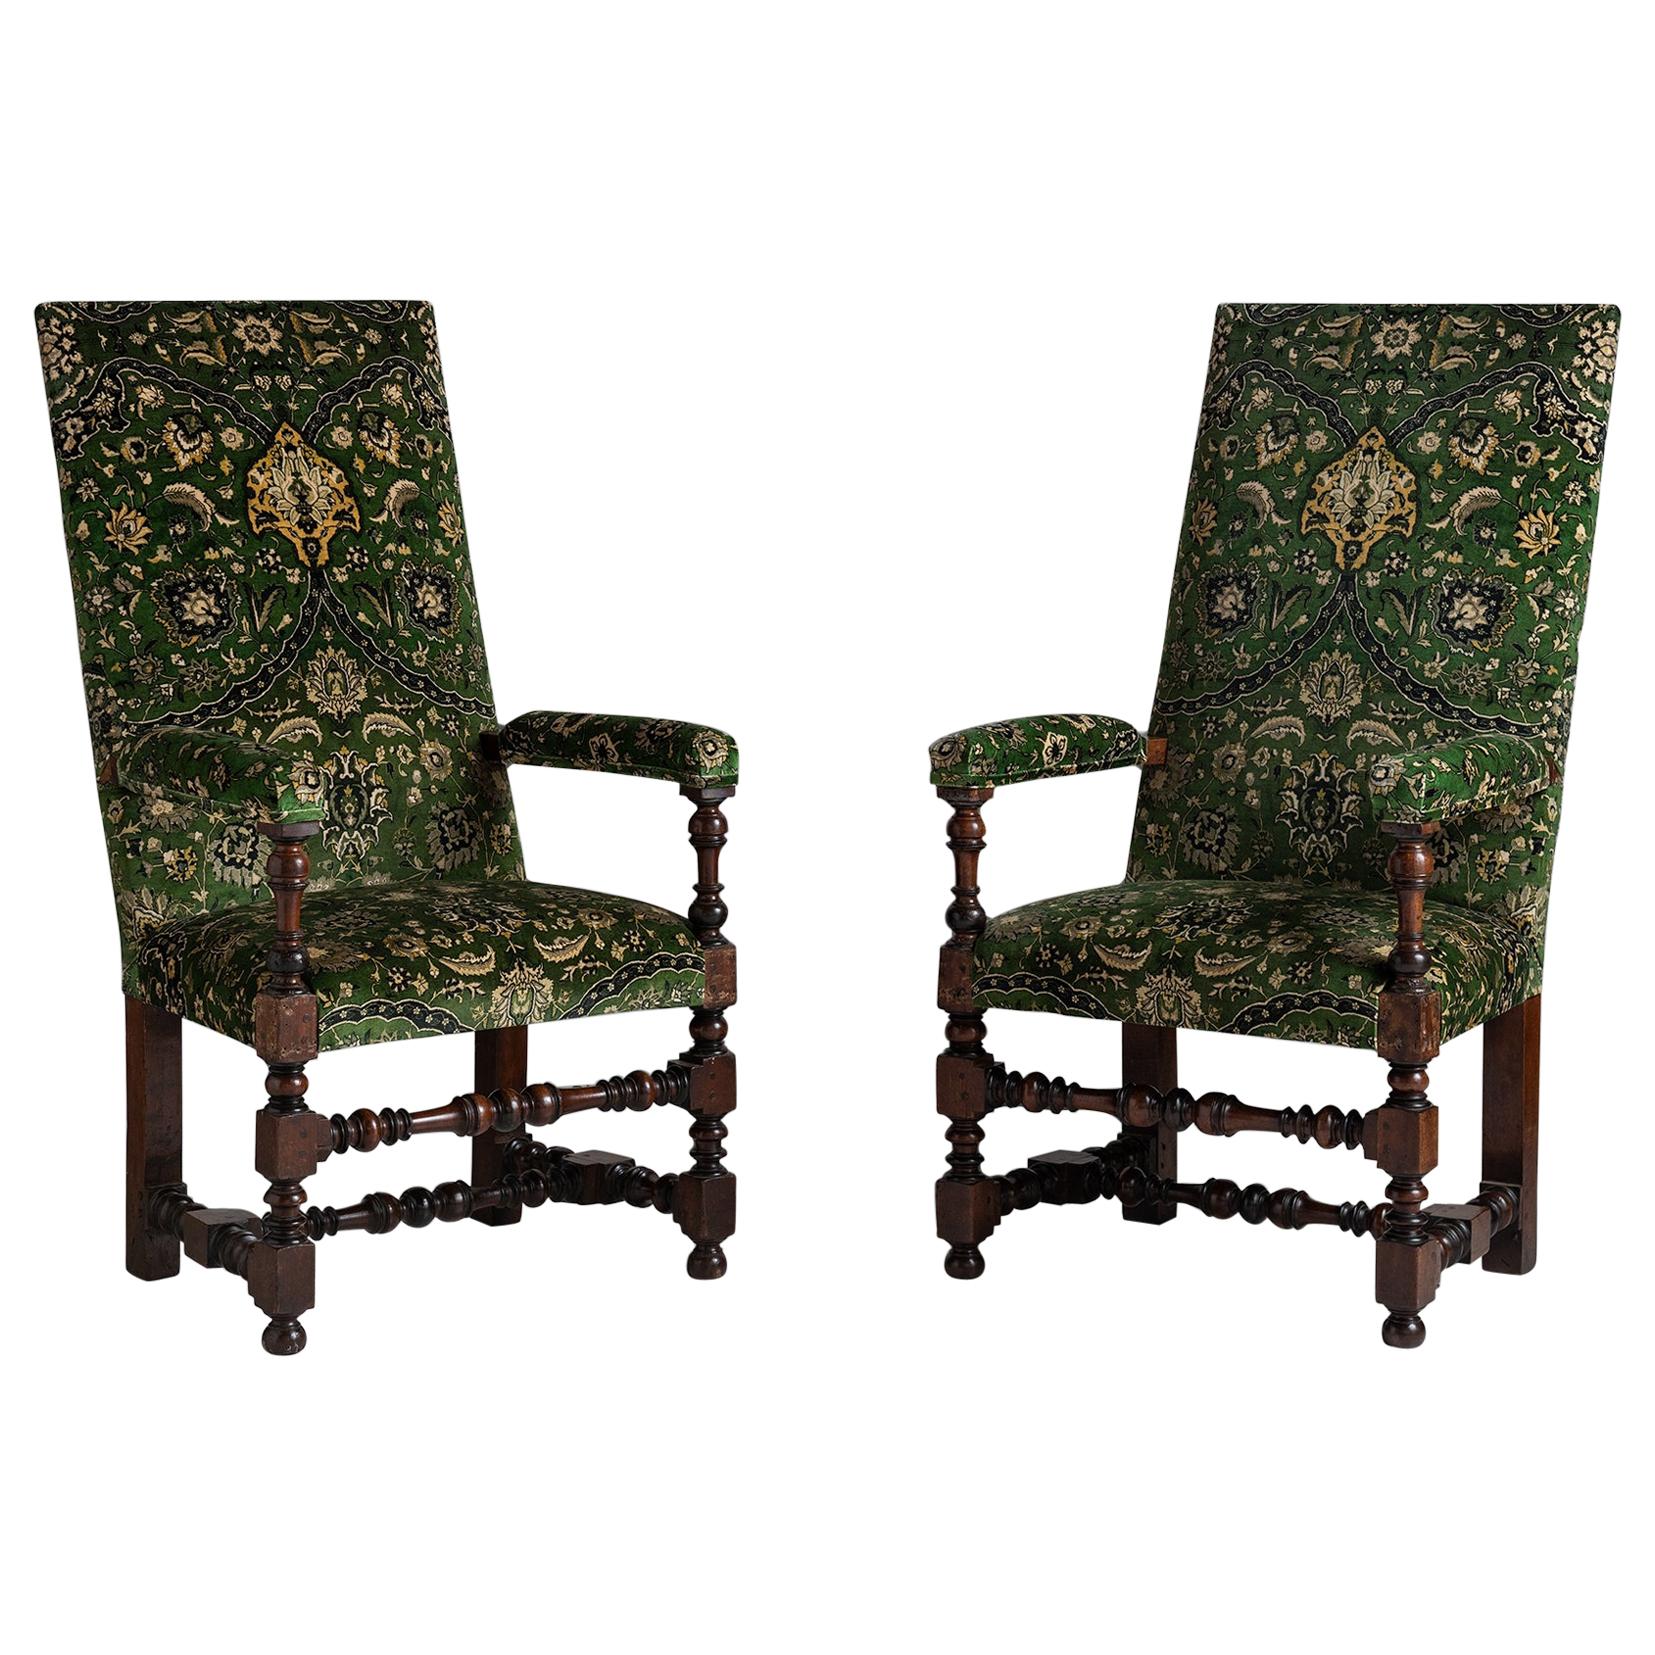 Tall Back Mahogany Chairs in 100% Cotton Velvet from House of Hackney 